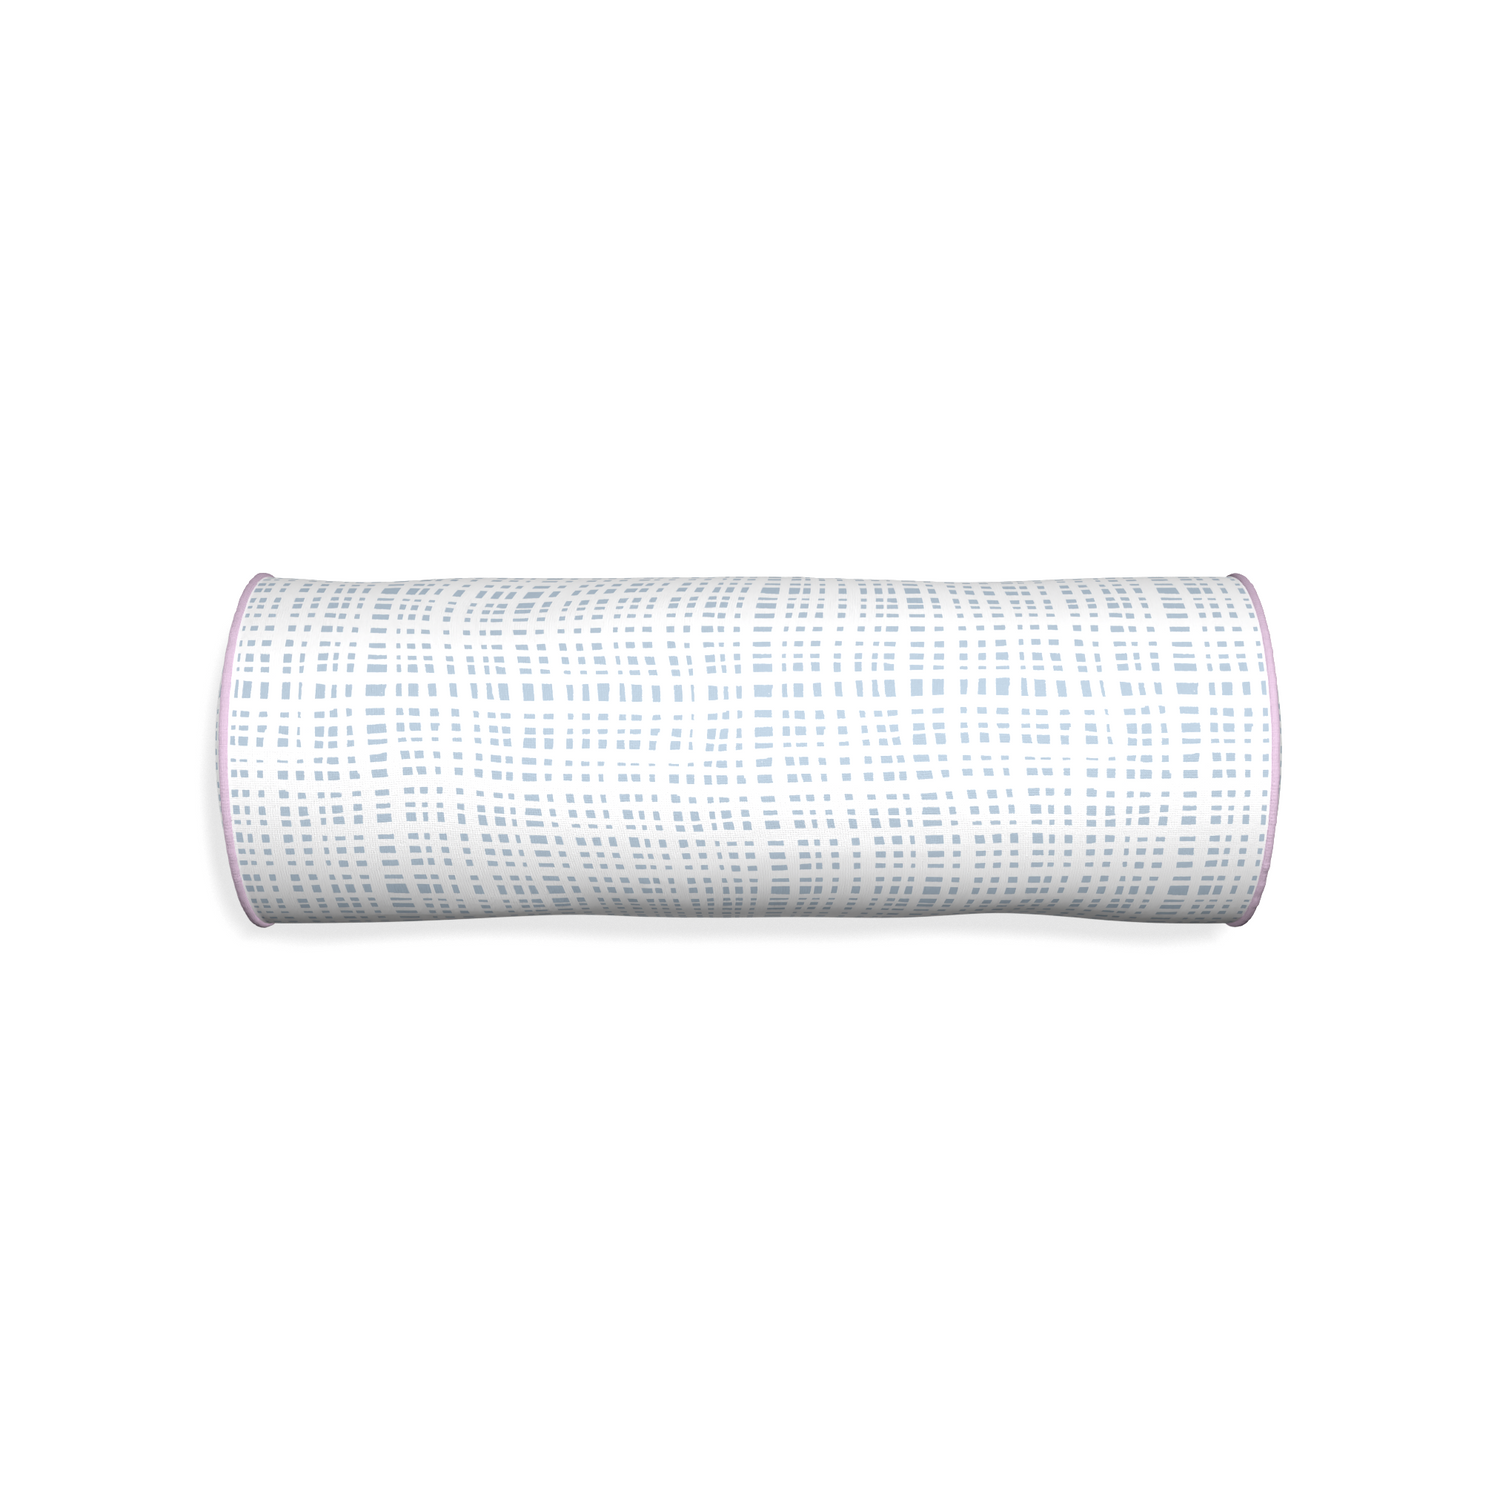 Bolster ginger custom plaid sky bluepillow with l piping on white background